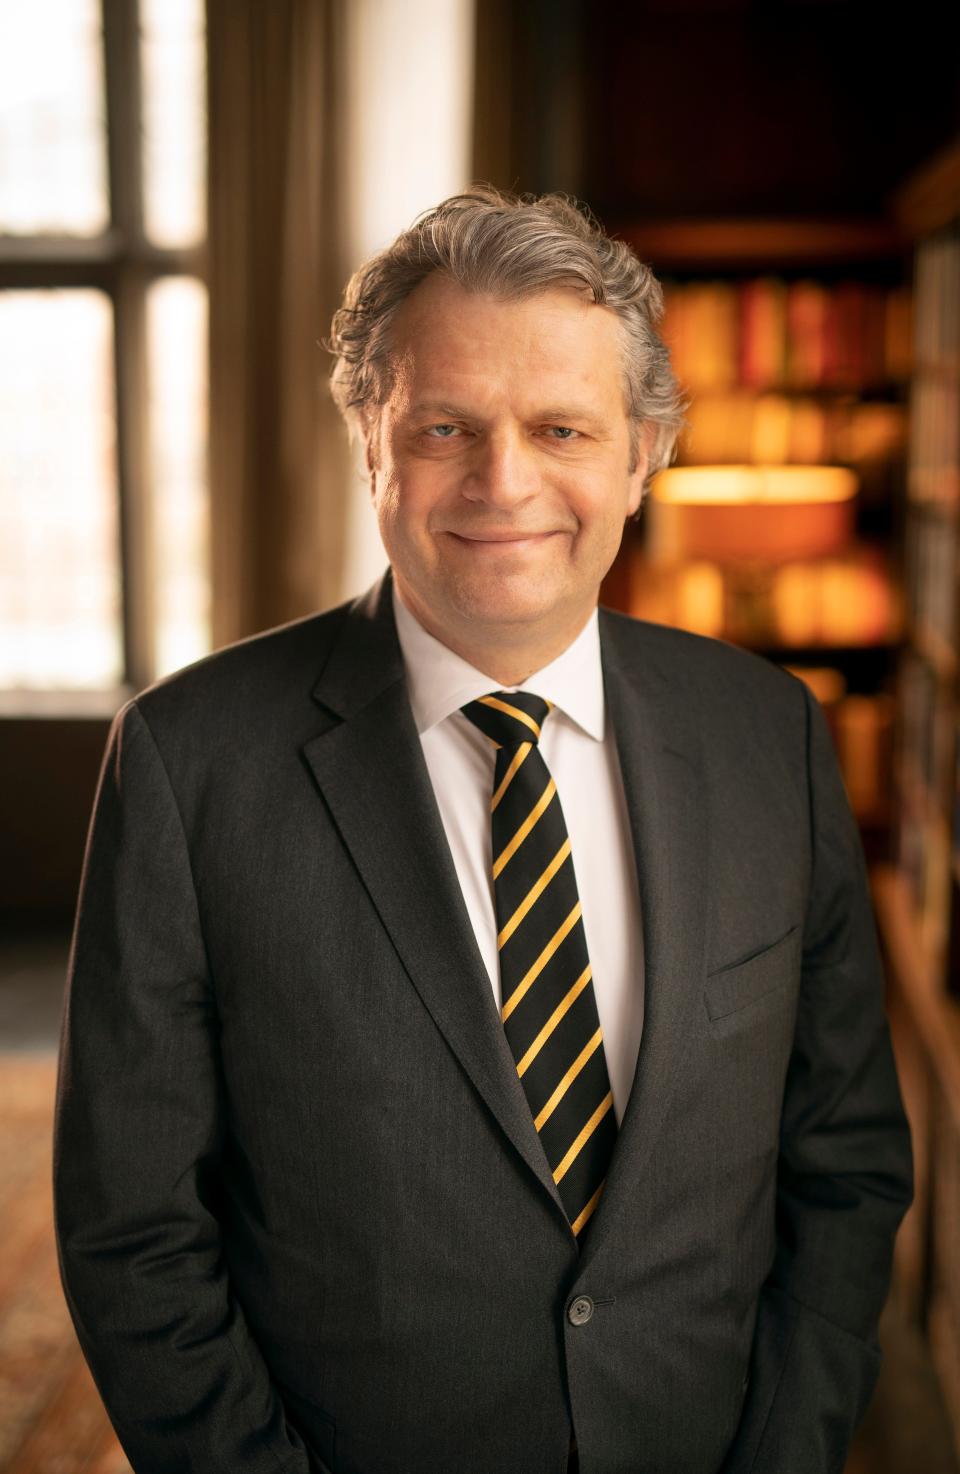 Vanderbilt University has selected Daniel Diermeier as its new chancellor, taking over leadership of one of Nashville's most prominent institutions.